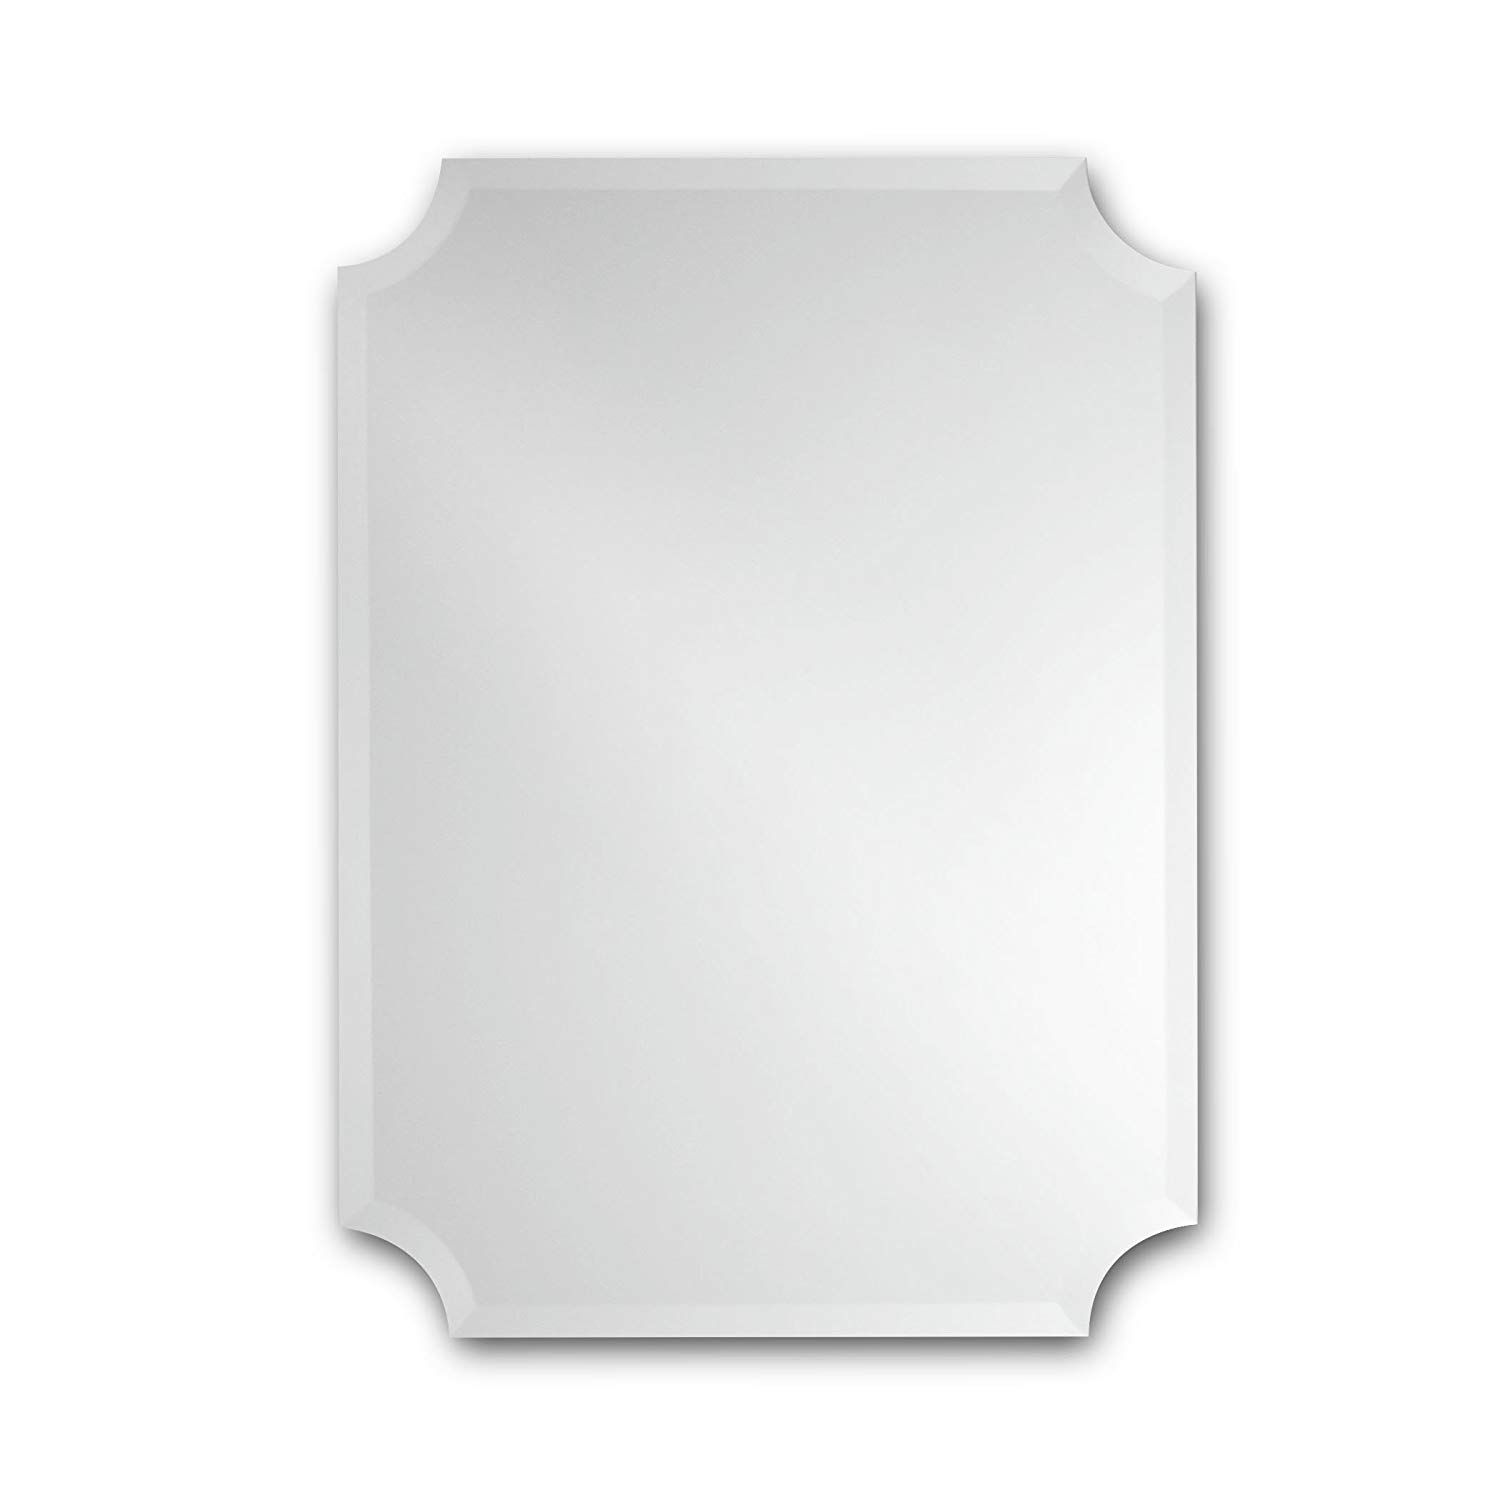 Buy The Better Bevel Round Frameless Wall Mirror | Bathroom, Vanity Throughout Rounded Edge Rectangular Wall Mirrors (View 2 of 15)